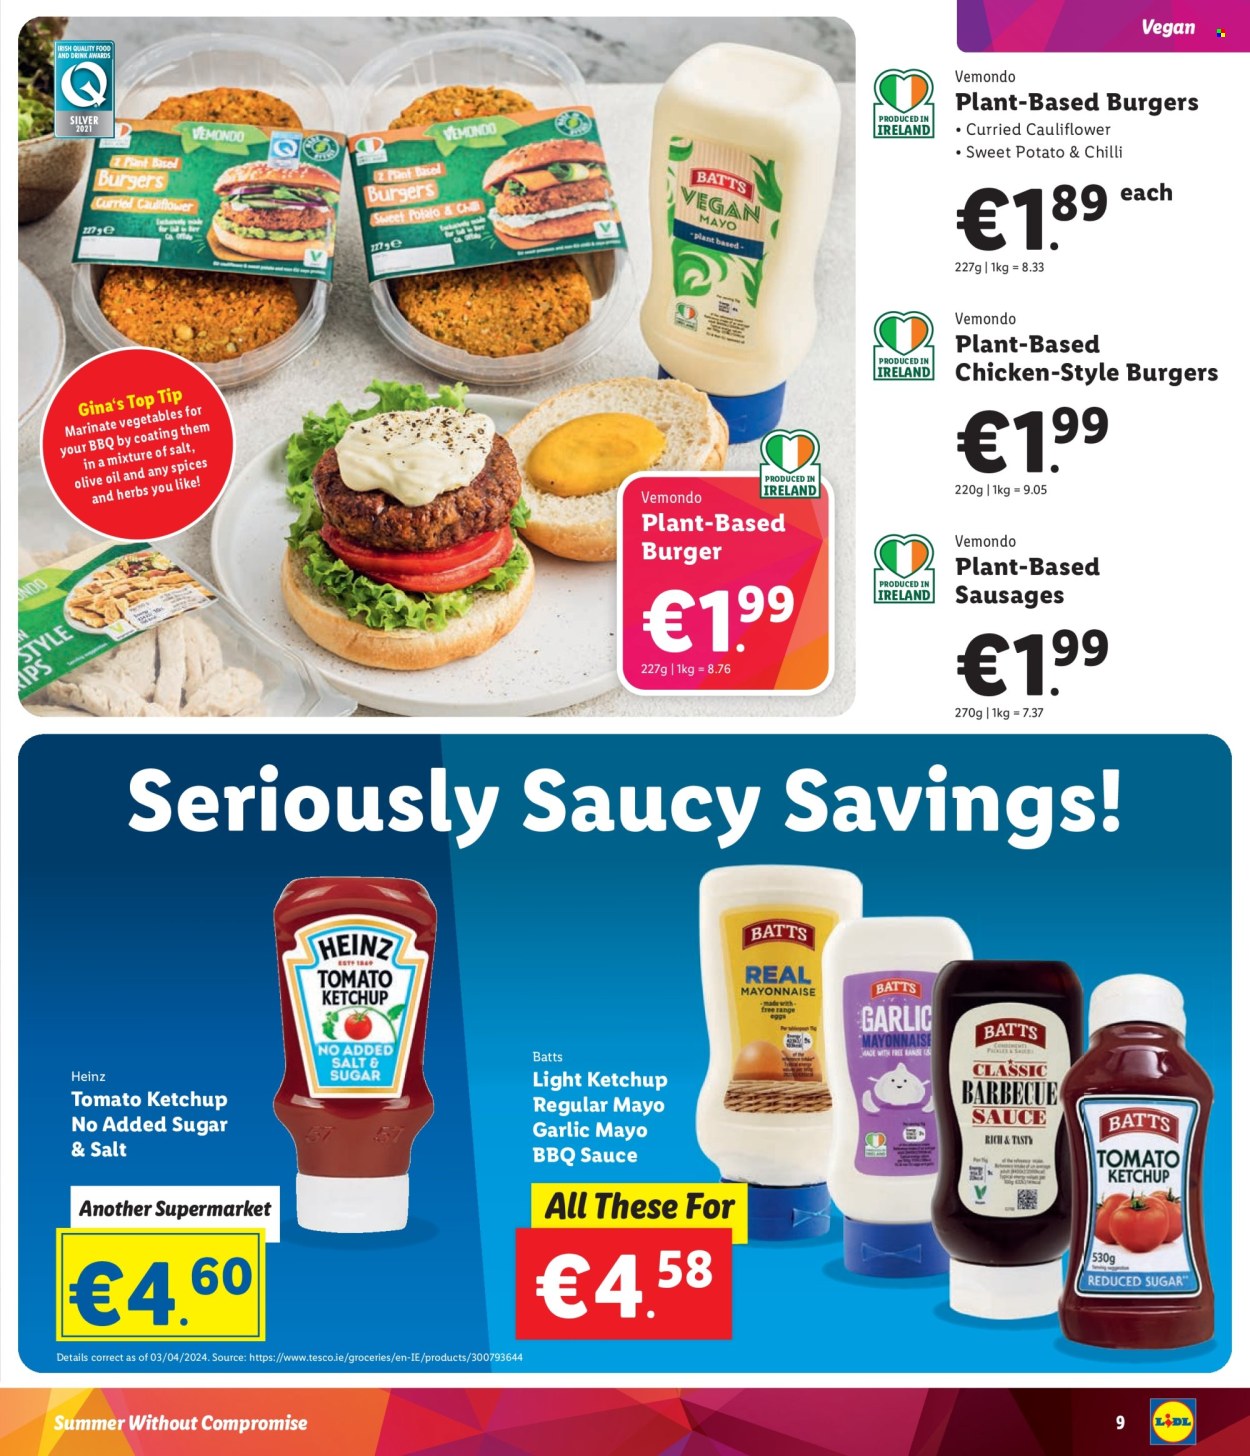 thumbnail - Lidl offer  - Sales products - cauliflower, garlic, plant based ready meal, plant based product, vegan meat, sausage, mayonnaise, vegan mayonnaise, Heinz, pickles, pickled vegetables, spice, BBQ sauce, ketchup, olive oil, eggs, sauce. Page 9.